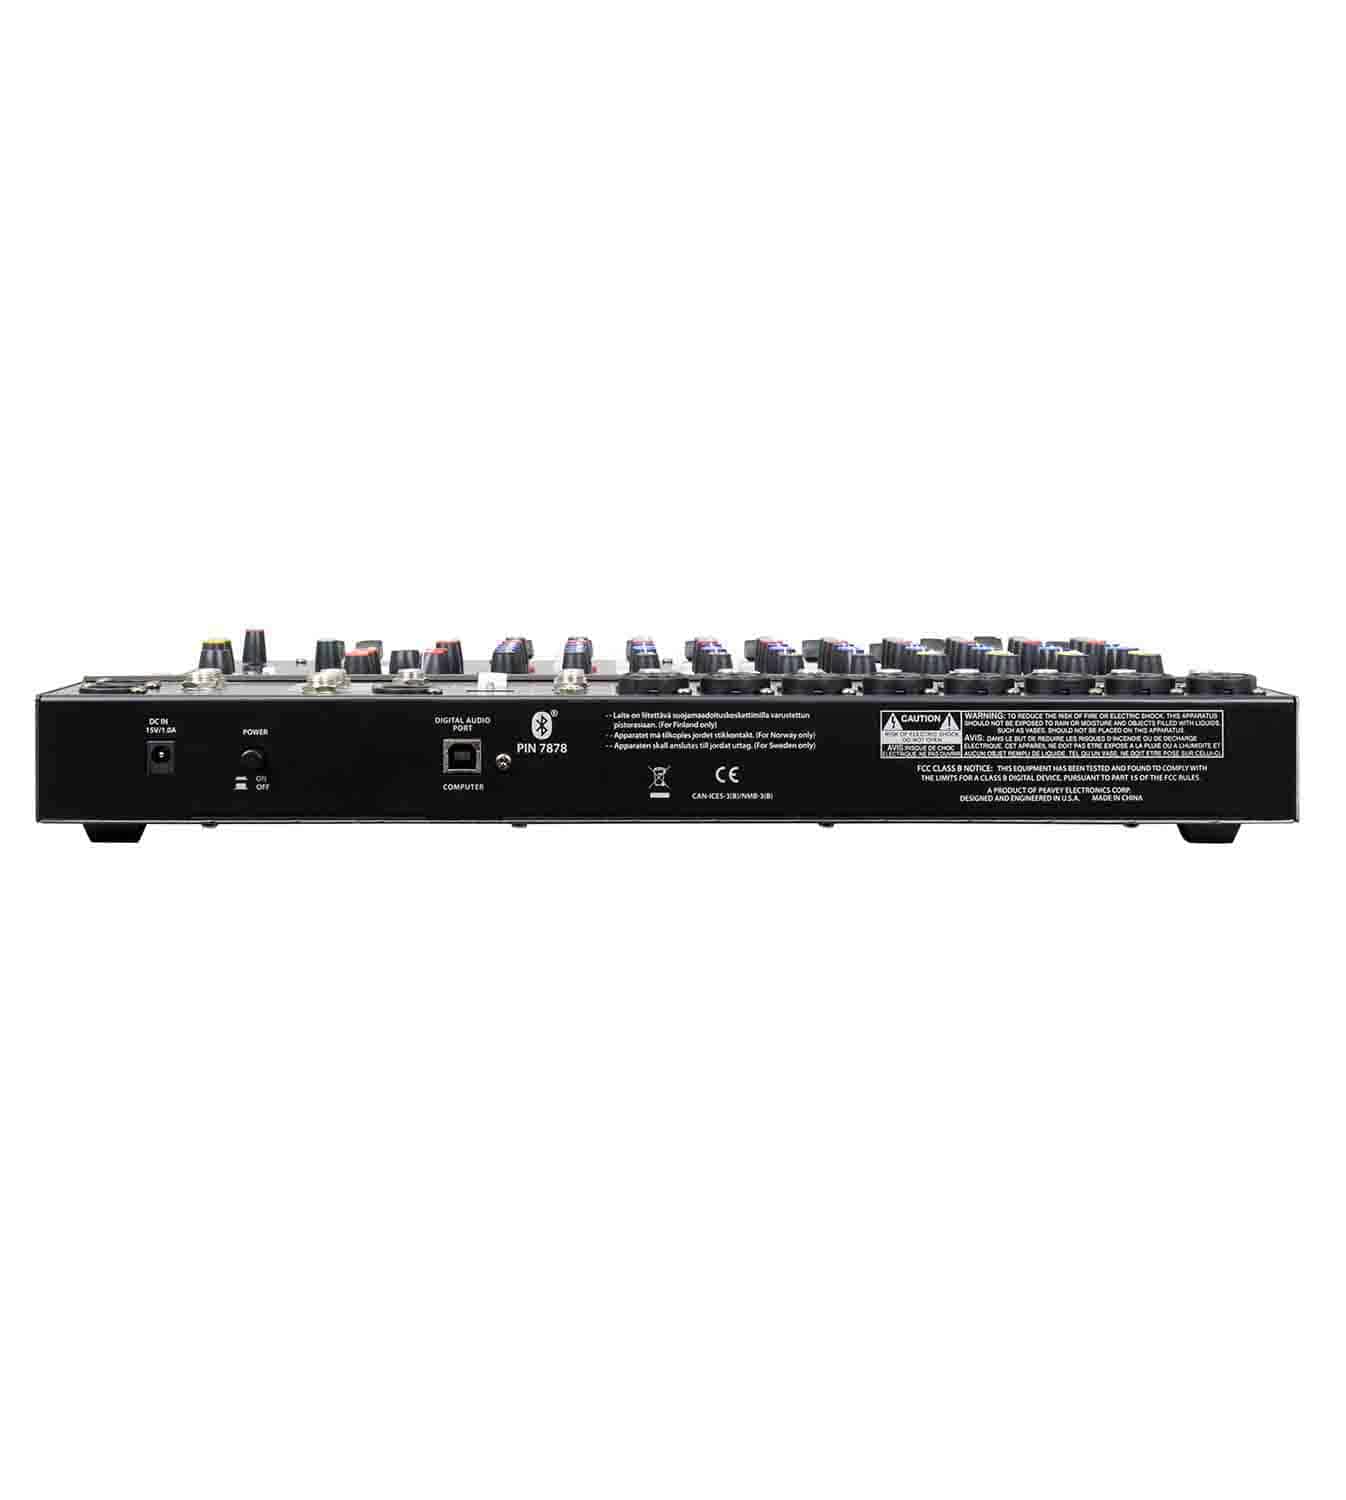 Peavey PV 14 AT, 14 Channel Compact Mixer with Bluetooth and Antares Auto-Tune - Hollywood DJ